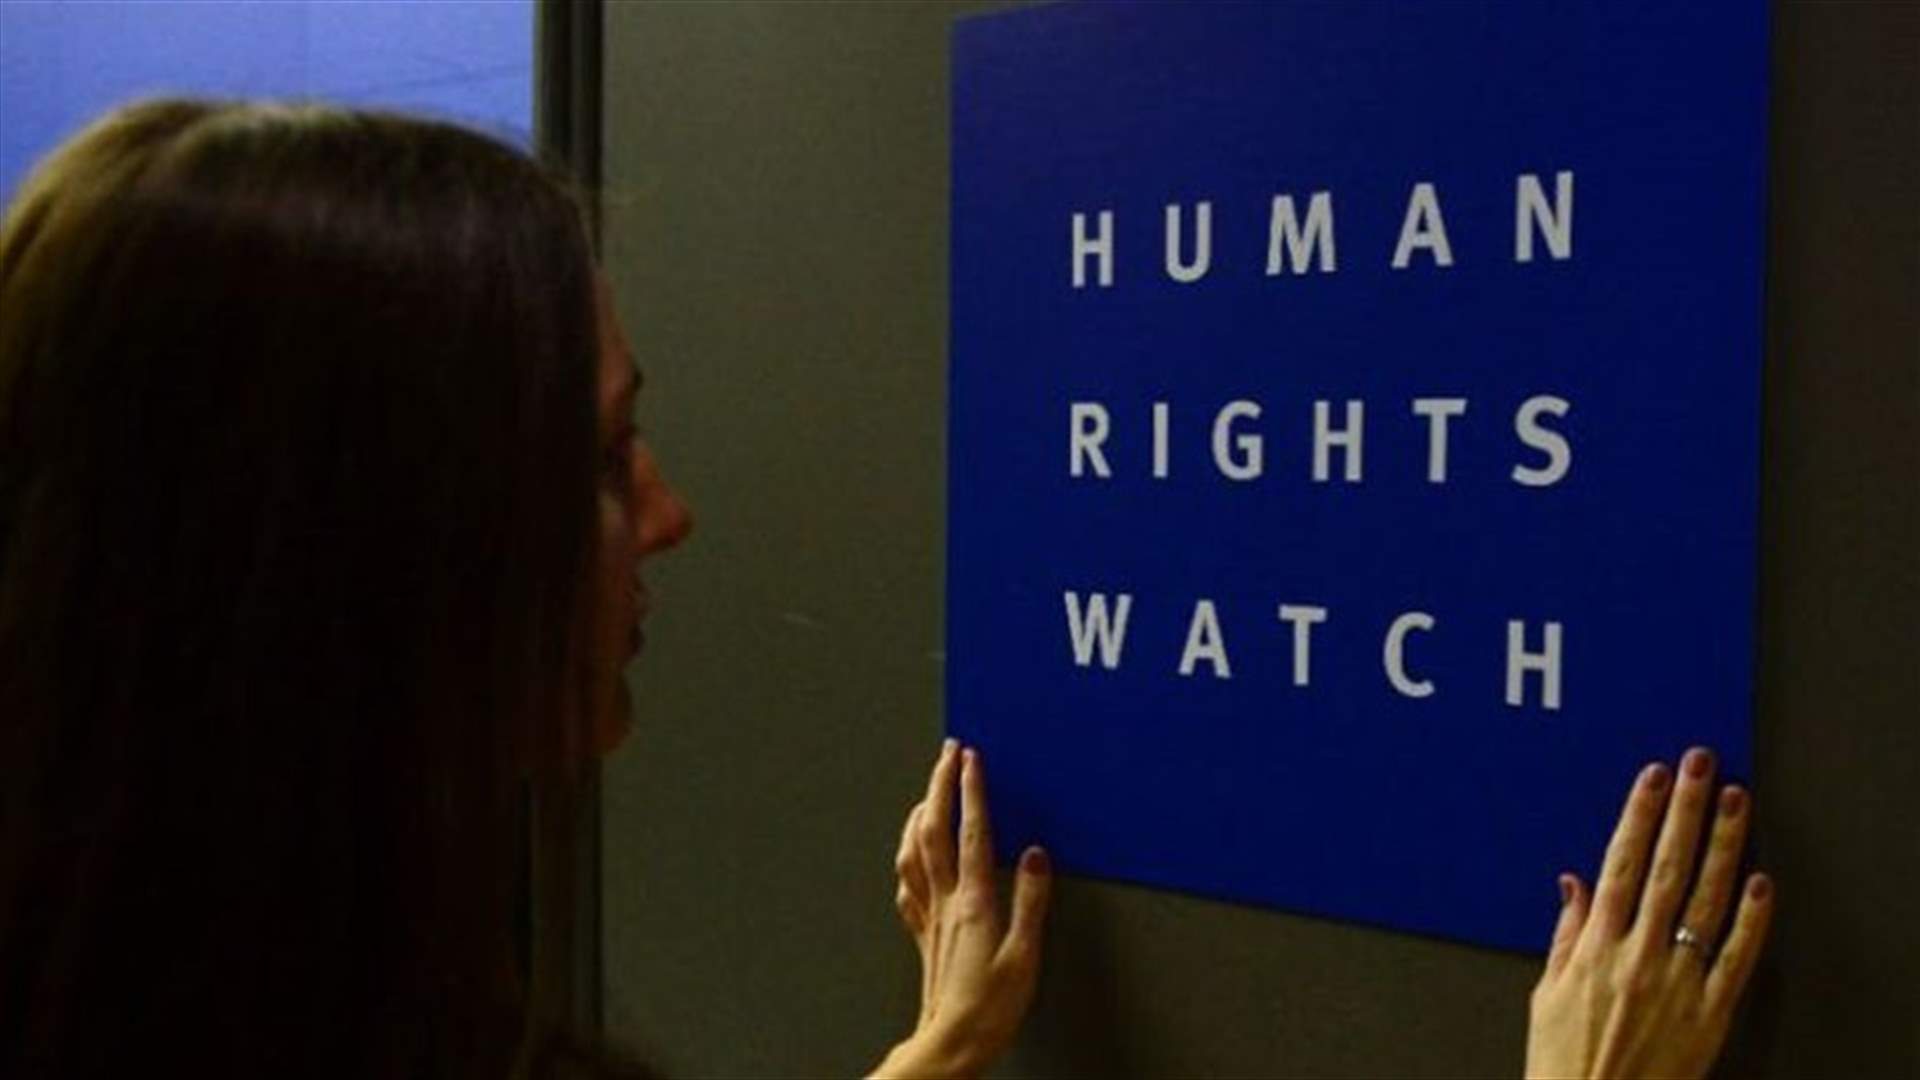 Following arrest of 3 Lebanese IS fighters, HRW raises concerns over torture, unfair trials